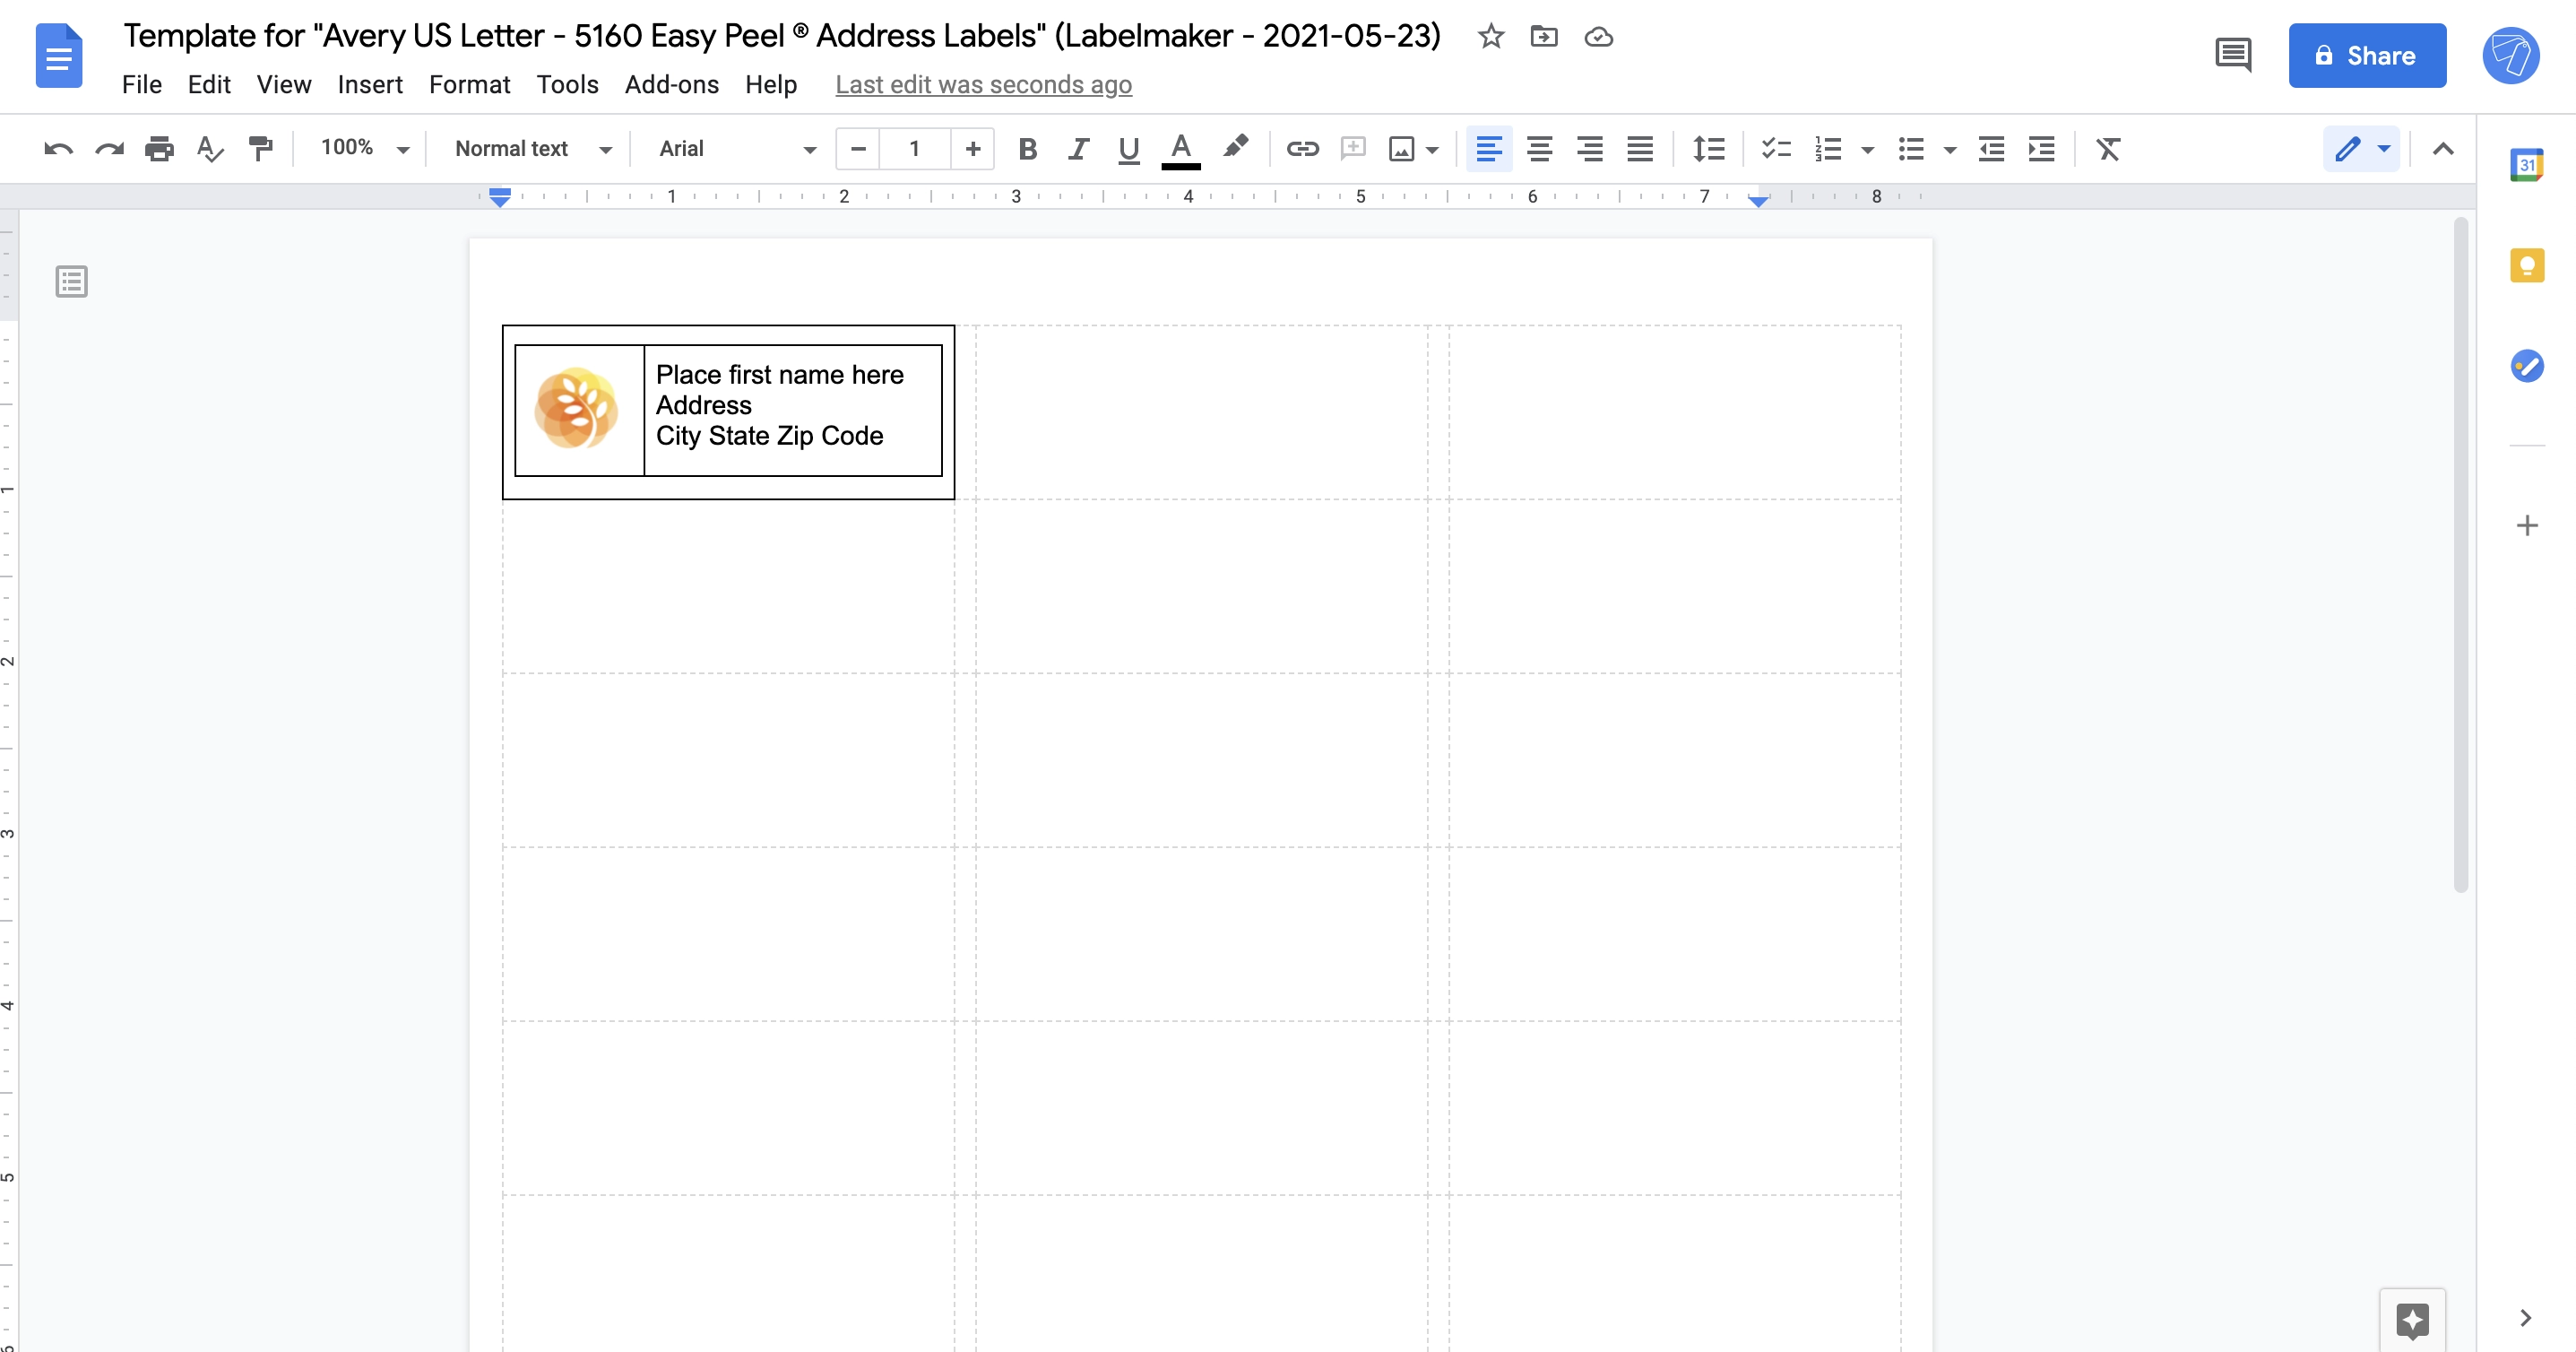 Screenshot of inserting images and text into labels in Google Docs